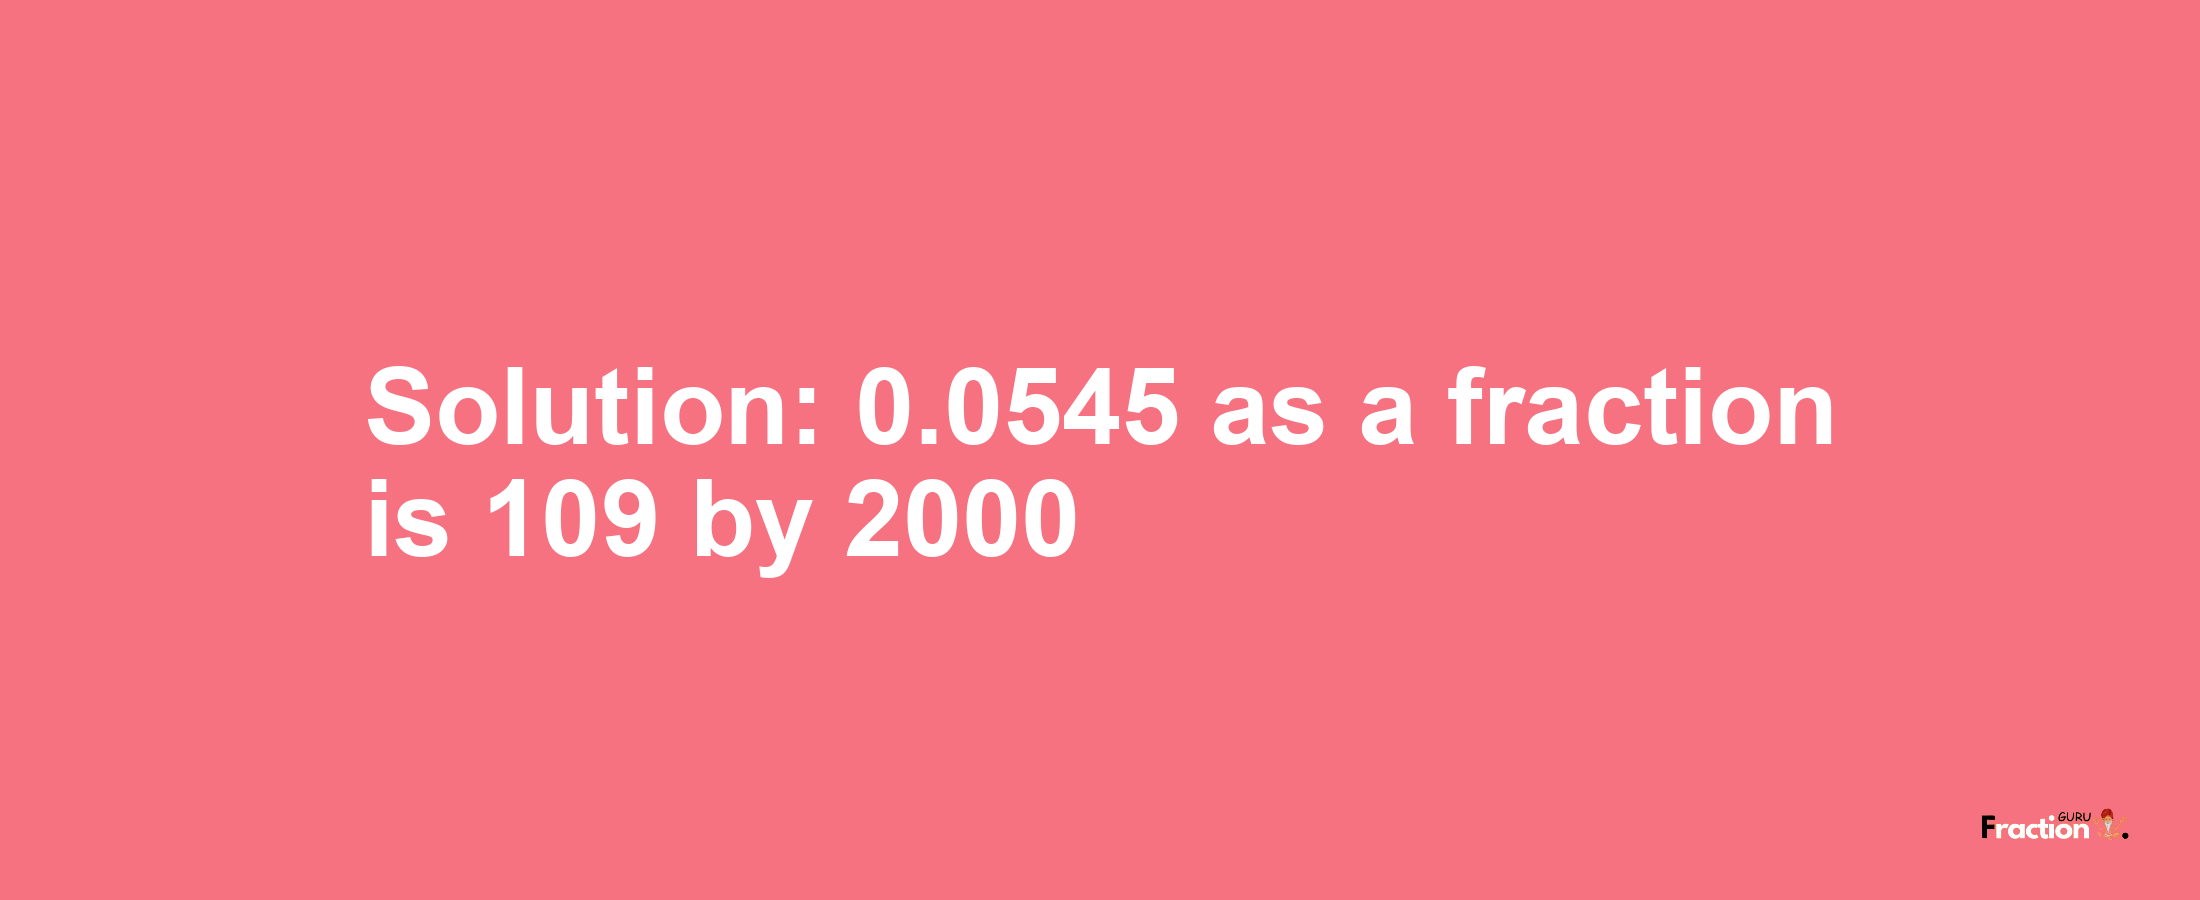 Solution:0.0545 as a fraction is 109/2000